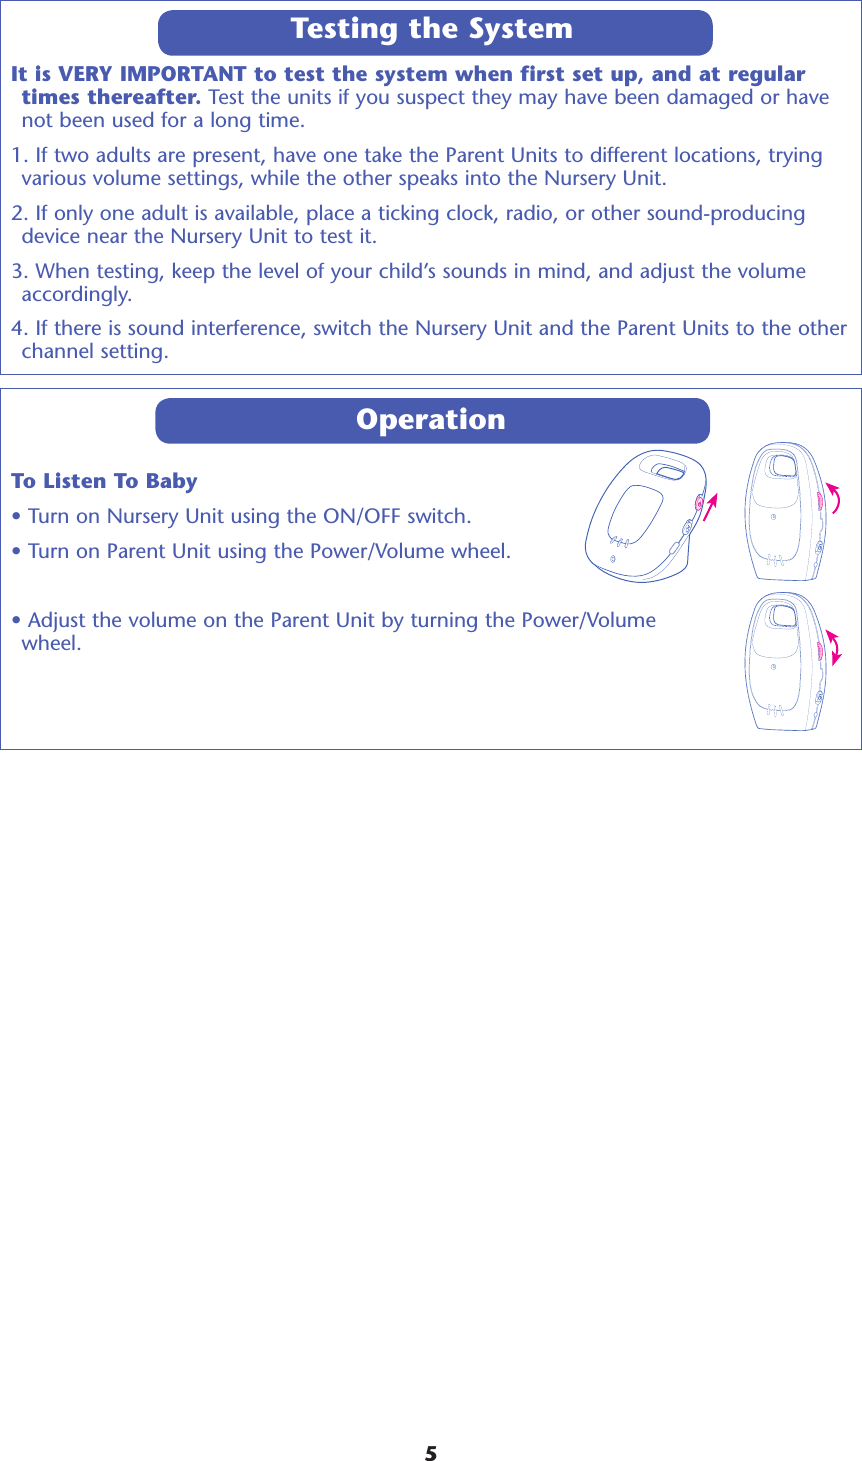 It is VERY IMPORTANT to test the system when first set up, and at regular times thereafter. Test the units if you suspect they may have been damaged or have not been used for a long time. 1. If two adults are present, have one take the Parent Units to different locations, trying various volume settings, while the other speaks into the Nursery Unit. 2. If only one adult is available, place a ticking clock, radio, or other sound-producing device near the Nursery Unit to test it. 3. When testing, keep the level of your child’s sounds in mind, and adjust the volume accordingly. 4. If there is sound interference, switch the Nursery Unit and the Parent Units to the other channel setting.OperationTo Listen To Baby• Turn on Nursery Unit using the ON/OFF switch.• Turn on Parent Unit using the Power/Volume wheel.• Adjust the volume on the Parent Unit by turning the Power/Volume  wheel.  Testing the System5